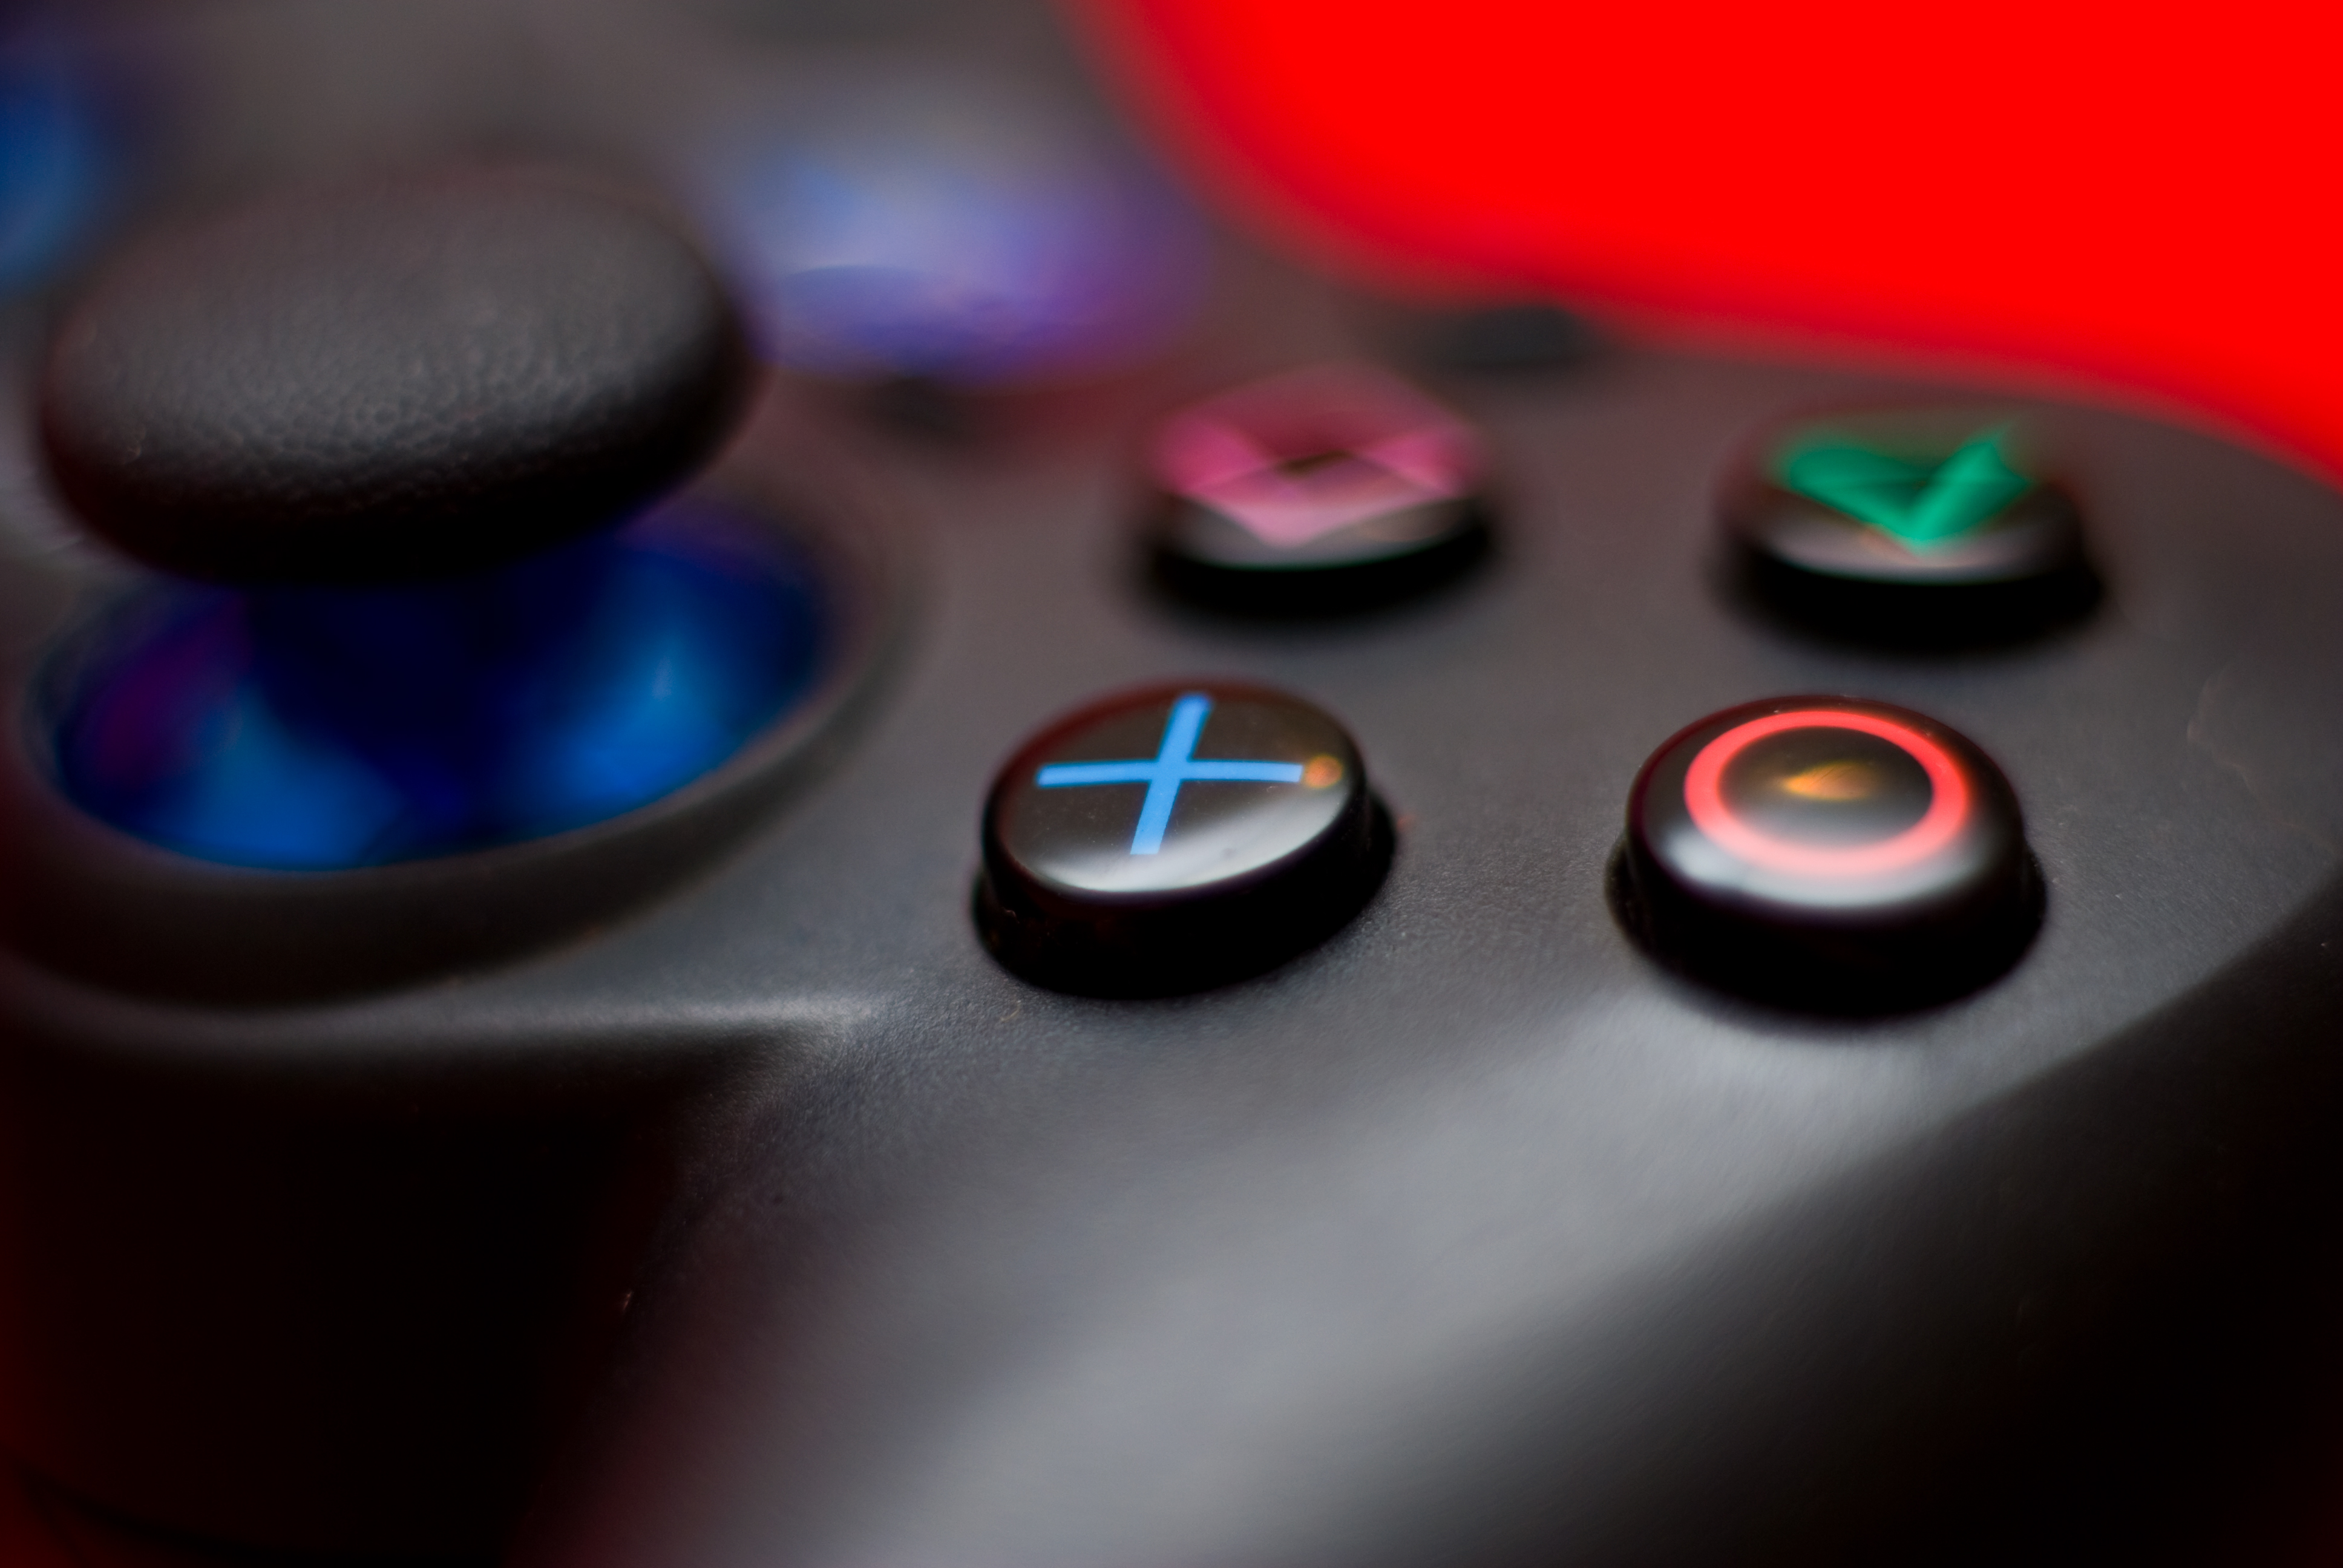 Closeup of a PlayStation controller, showing four buttons and a joystick